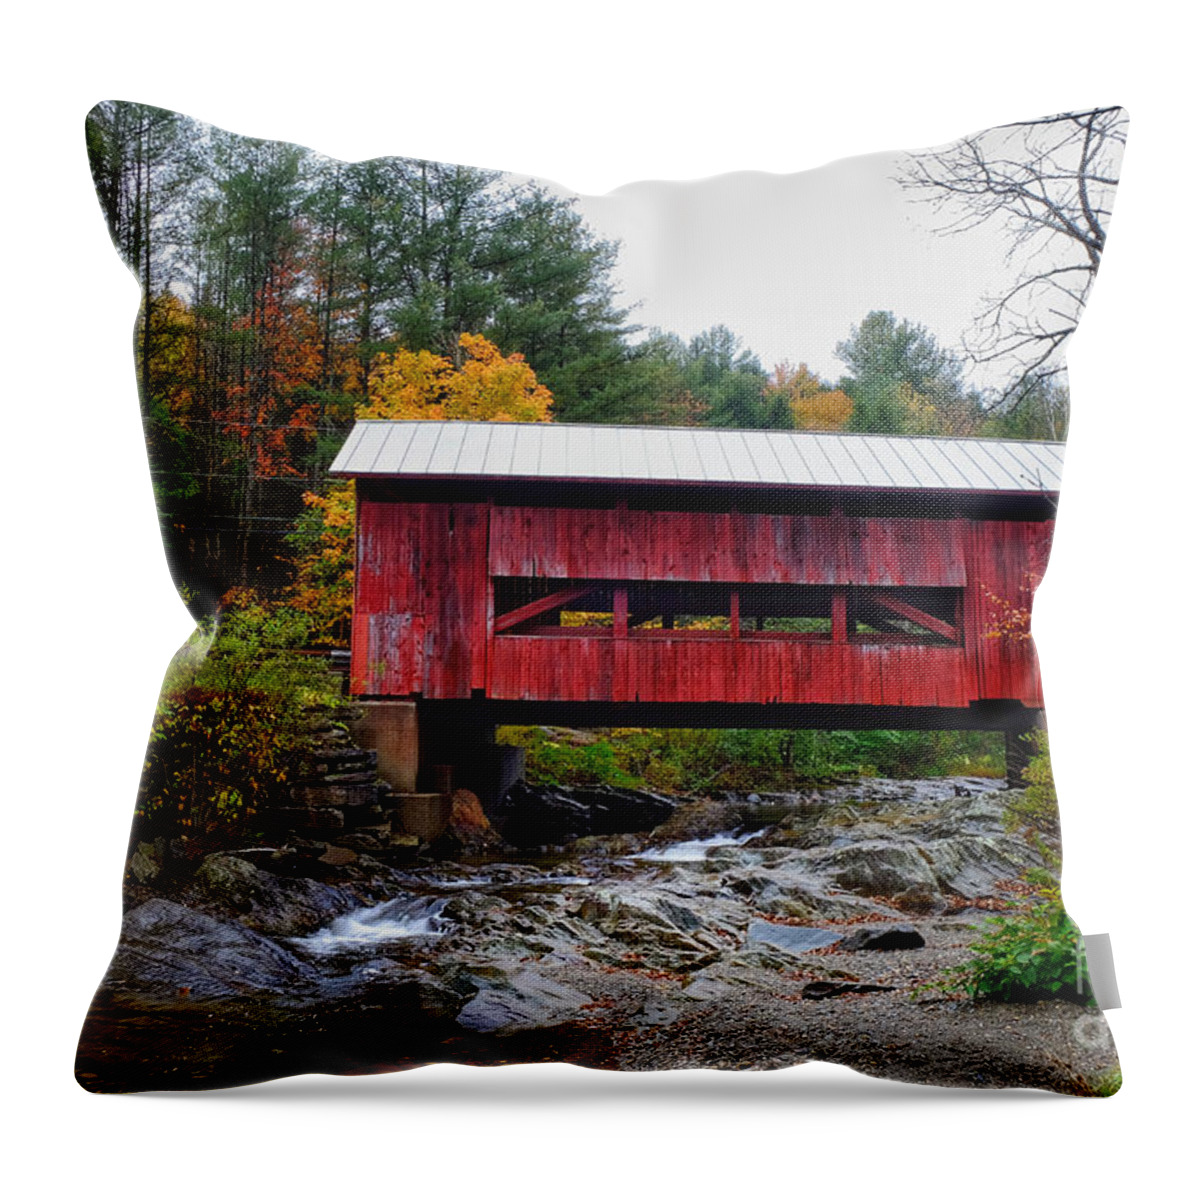 Covered Bridge Throw Pillow featuring the photograph Upper Cox Brook Covered Bridge in Northfield Vermont by T Lowry Wilson